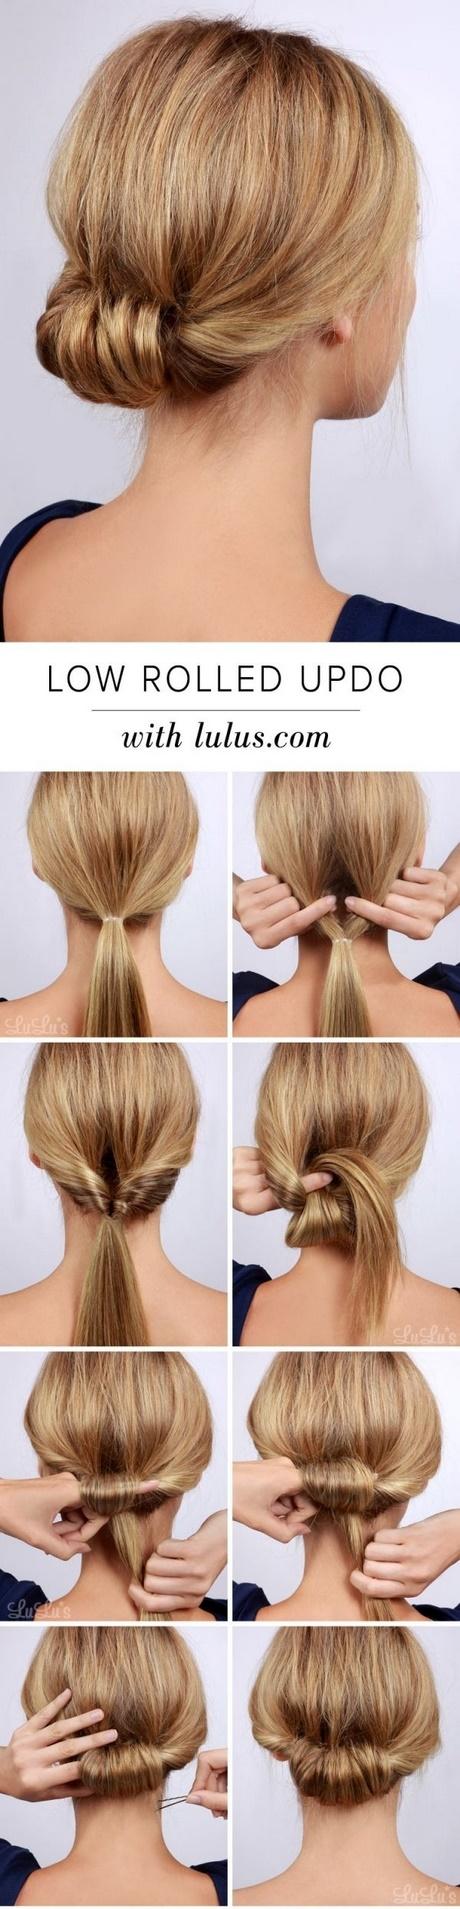 Long thick hair easy updos long-thick-hair-easy-updos-06_7